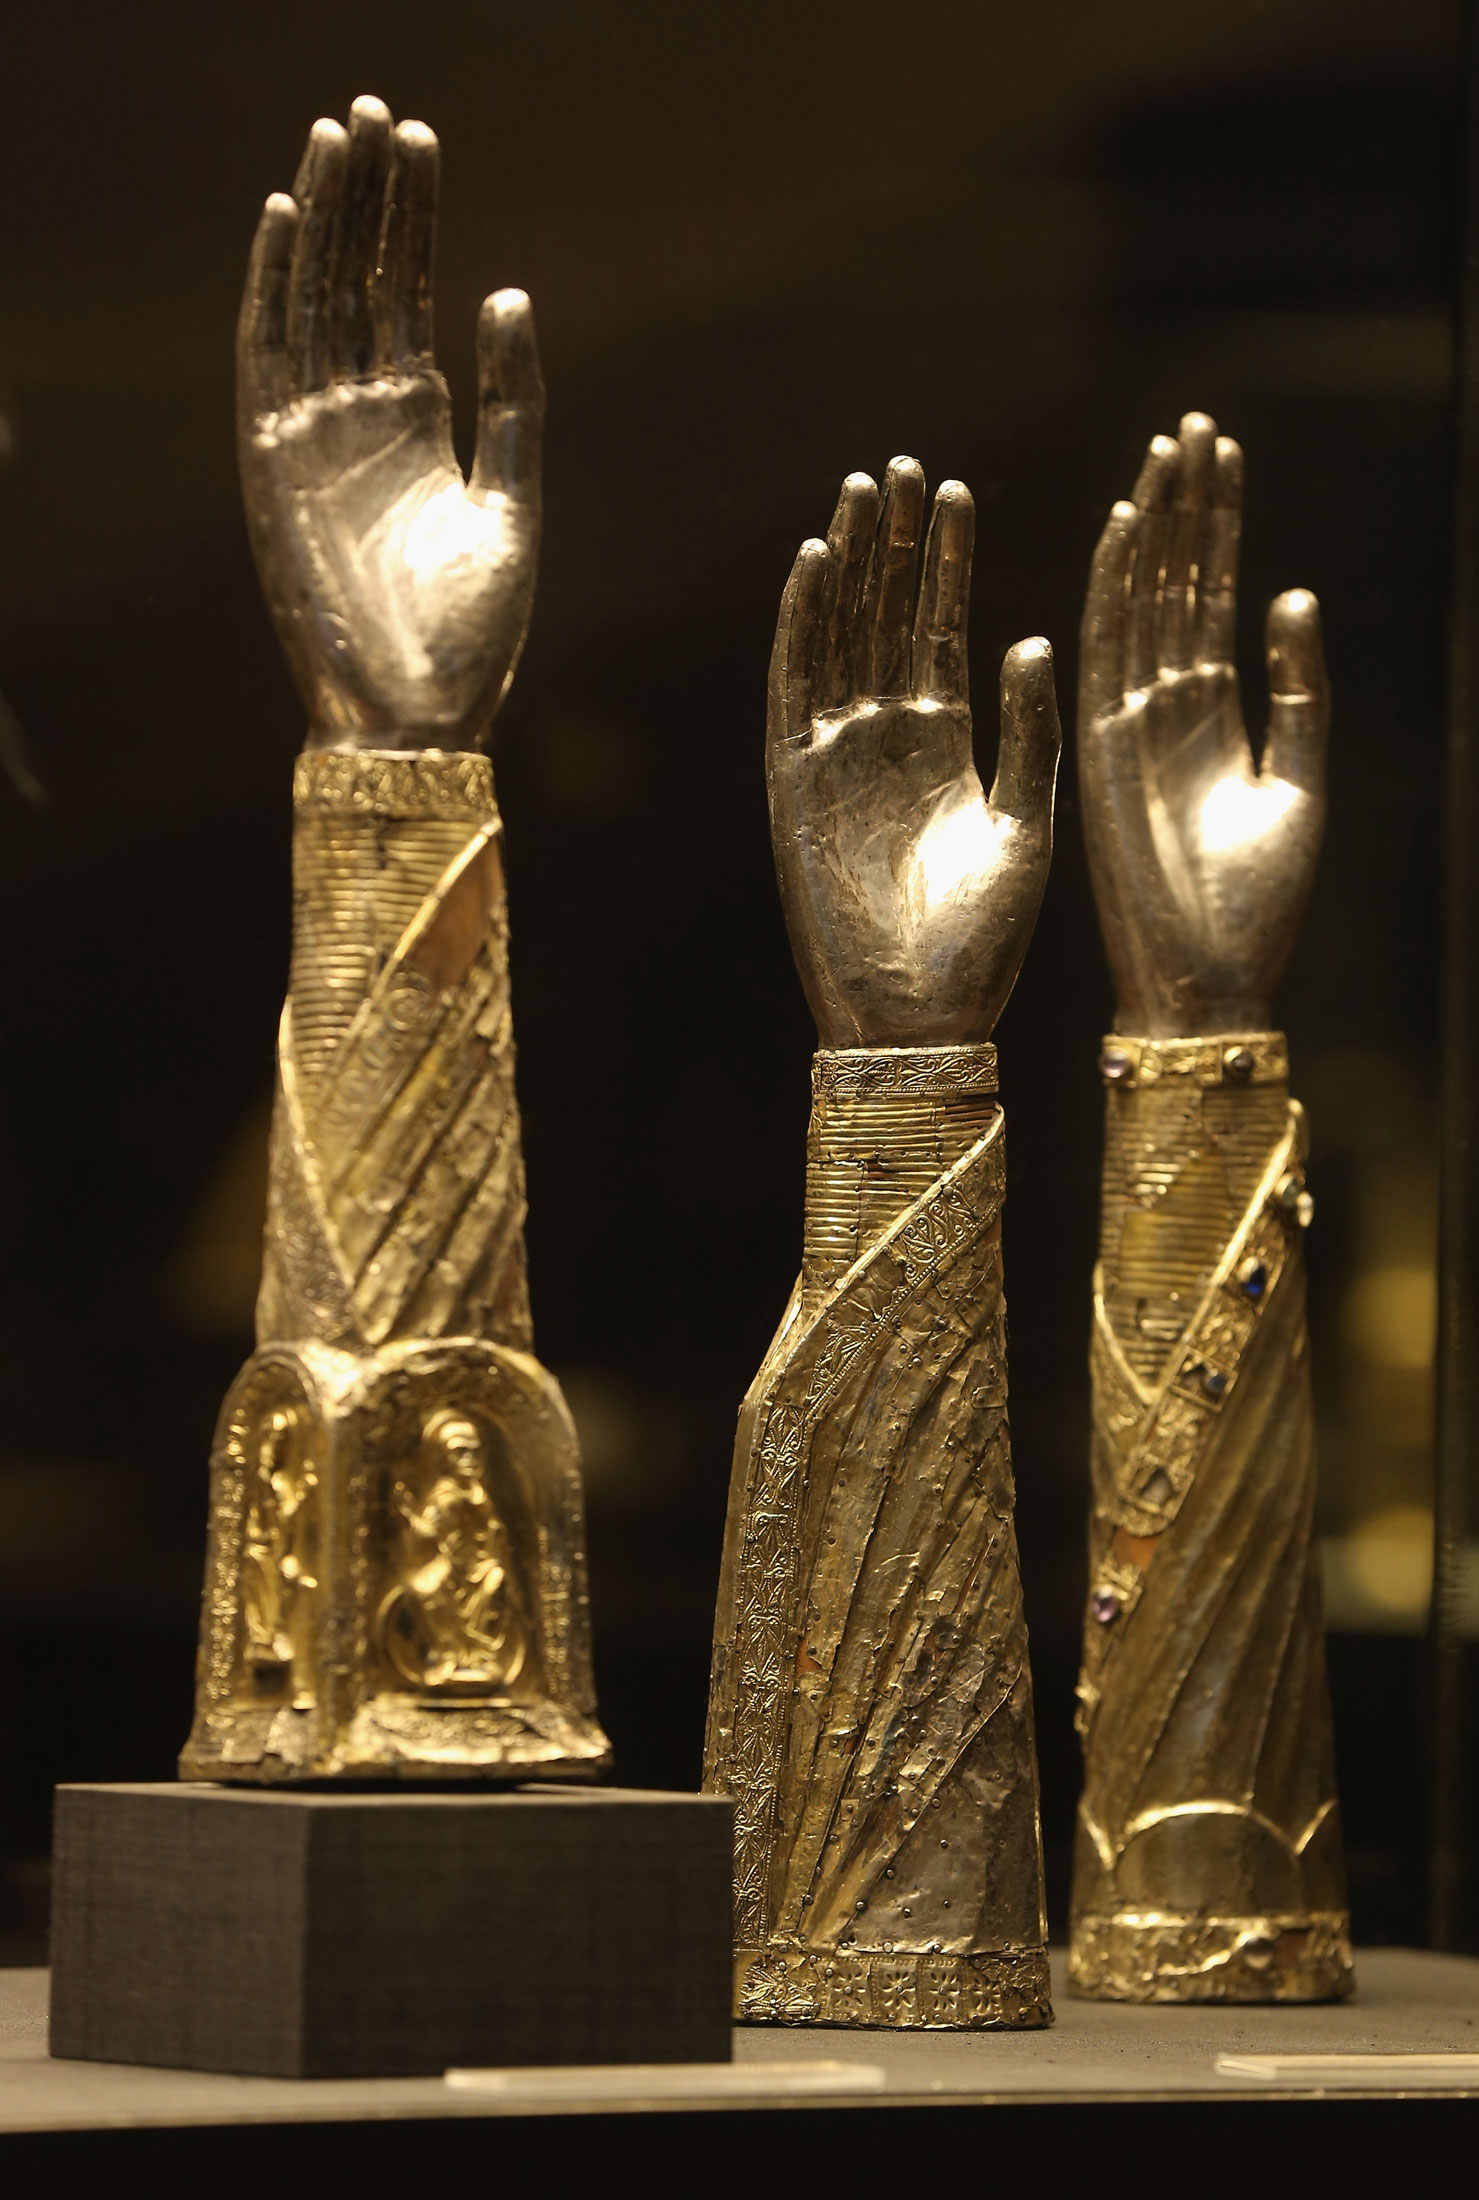 Reliquaries of the Guelph Treasure stand on display at the Museum of Decorative Arts in Berlin on Feb. 26, 2015.